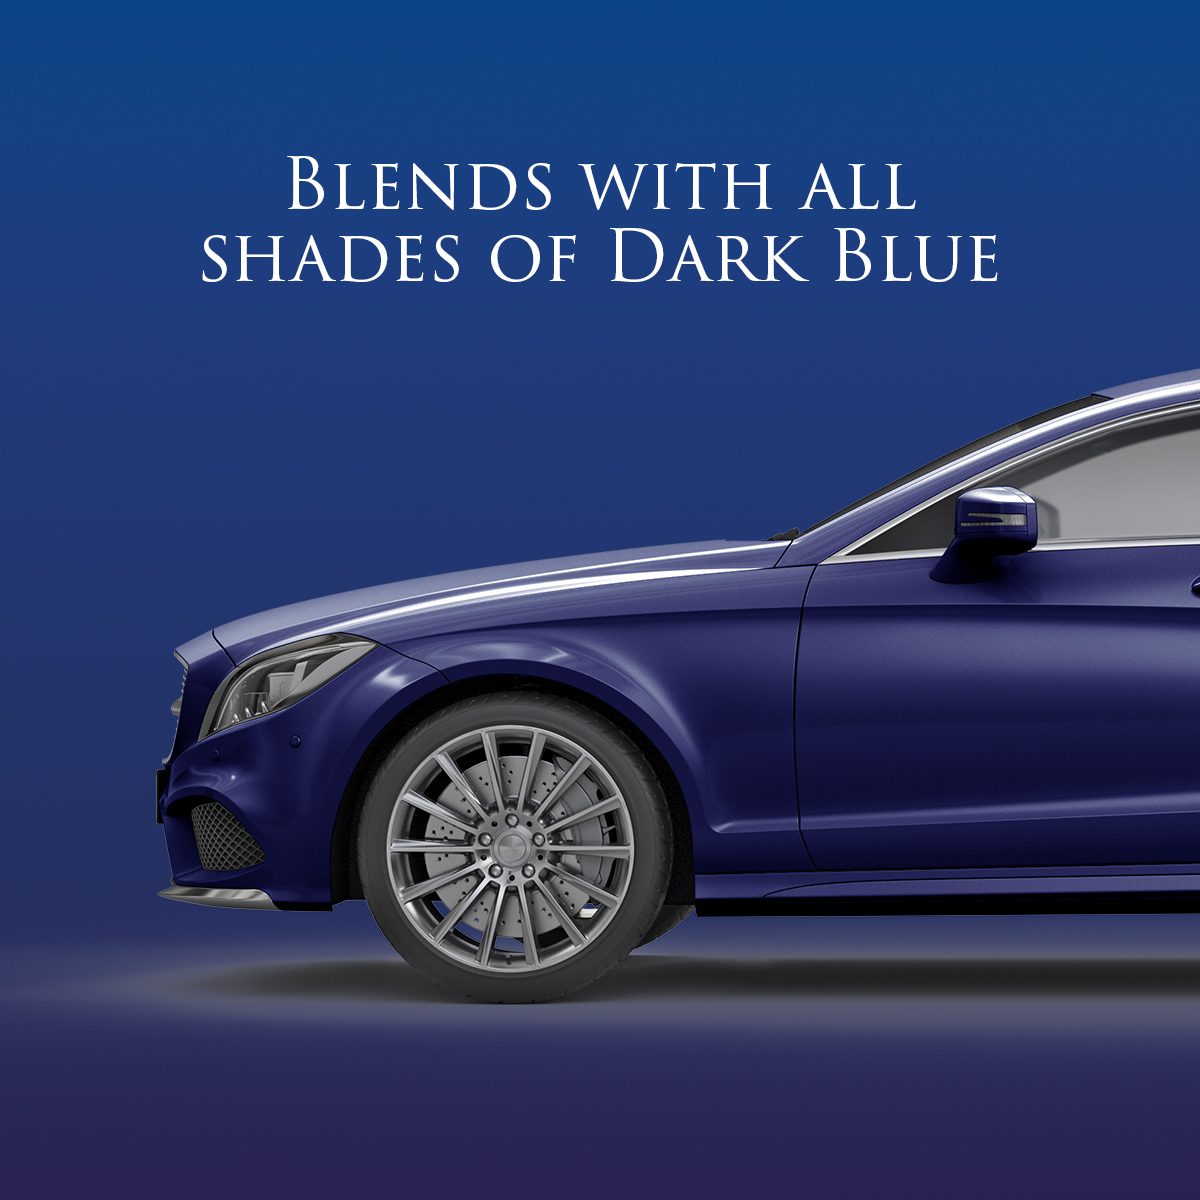 Blends with all shades of dark blue